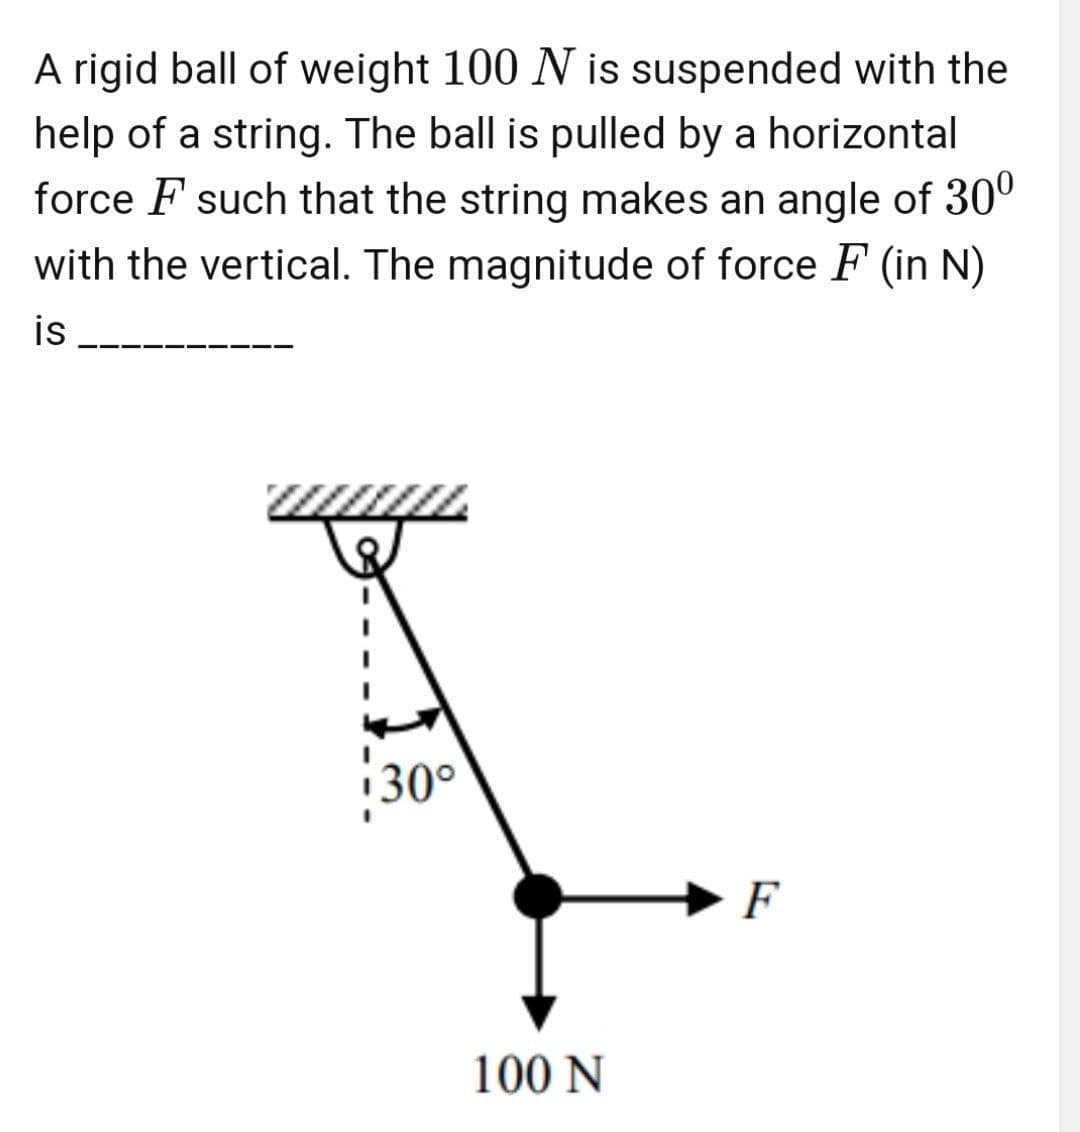 A rigid ball of weight 100 N is suspended with the
help of a string. The ball is pulled by a horizontal
force F such that the string makes an angle of 30º
with the vertical. The magnitude of force F (in N)
is
30°
F
100 N